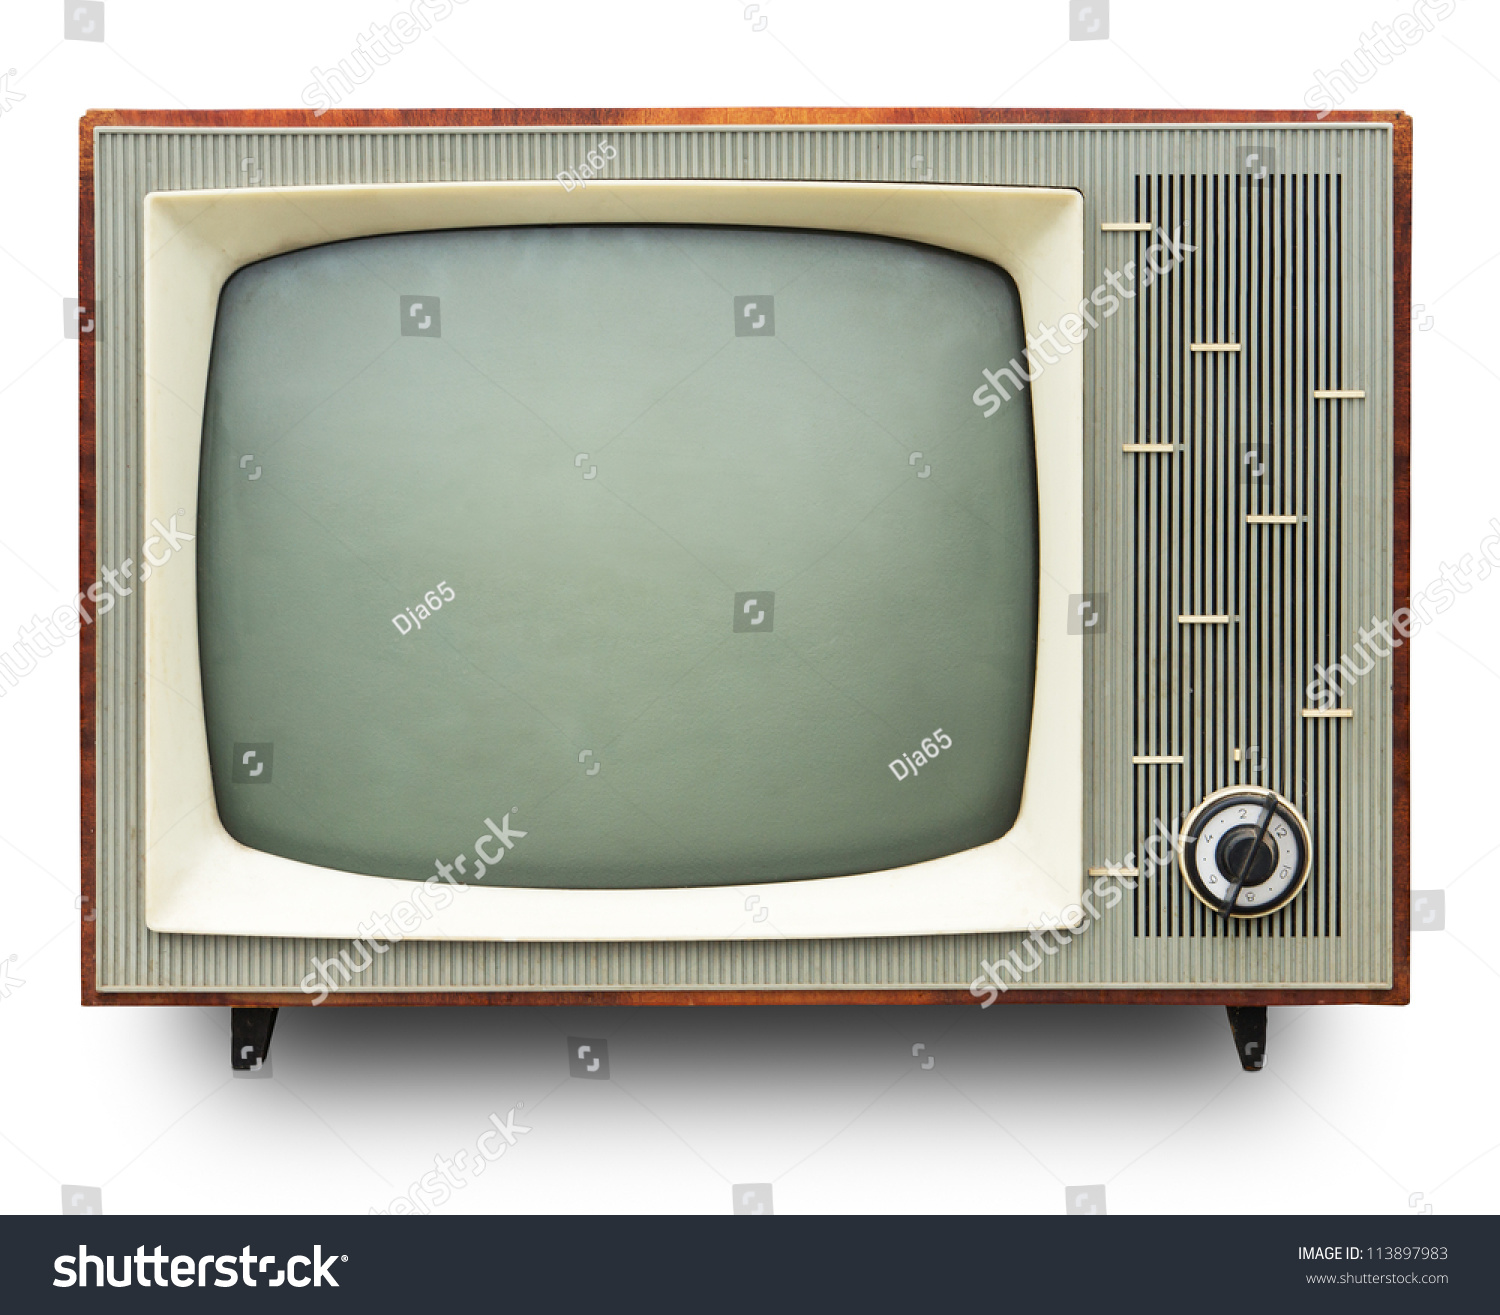 Vintage Tv Set Isolated Clipping Path Stock Photo 113897983 Shutterstock